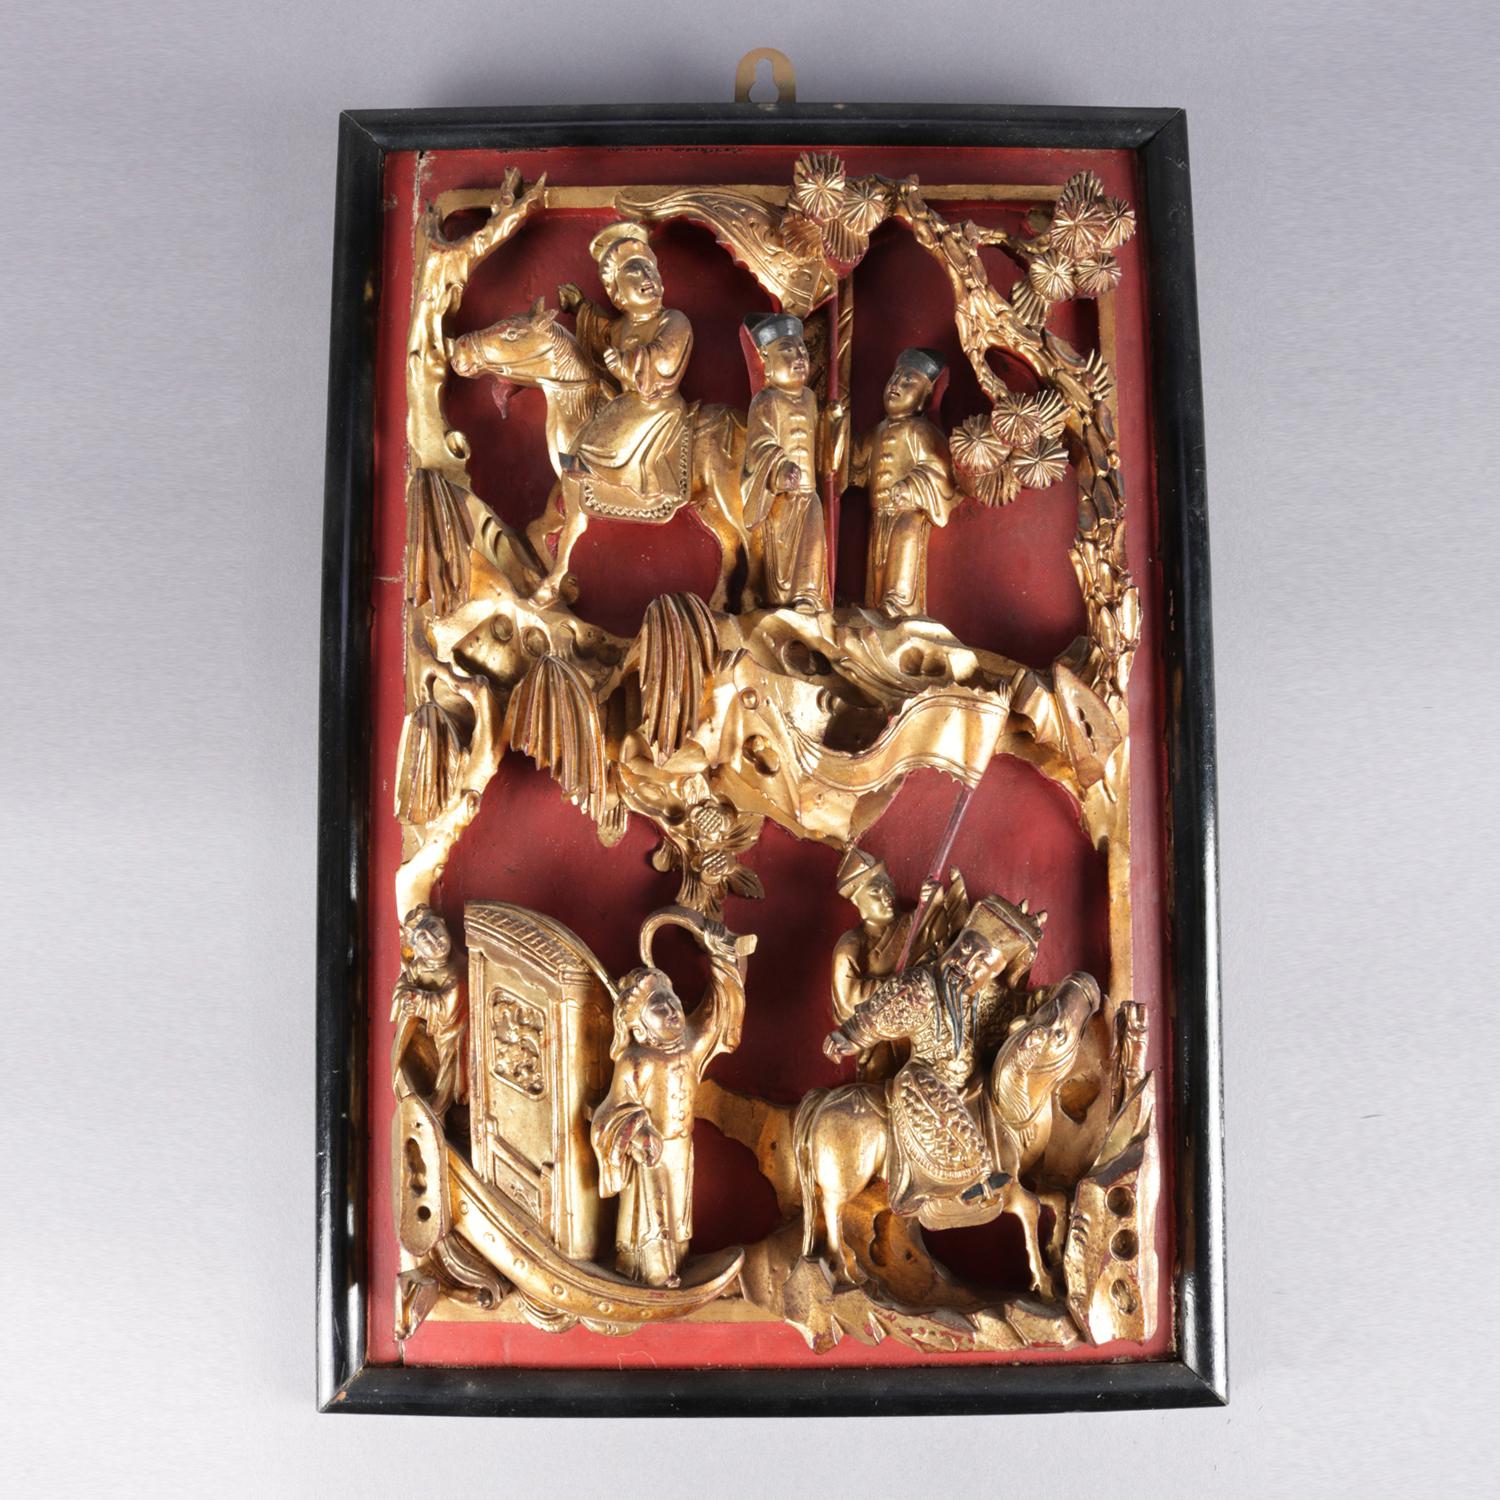 Antique Chinese vermilion and giltwood wall plaque features multi-dimensional scene depicting warriors on horseback, circa 1900

Measures: 16